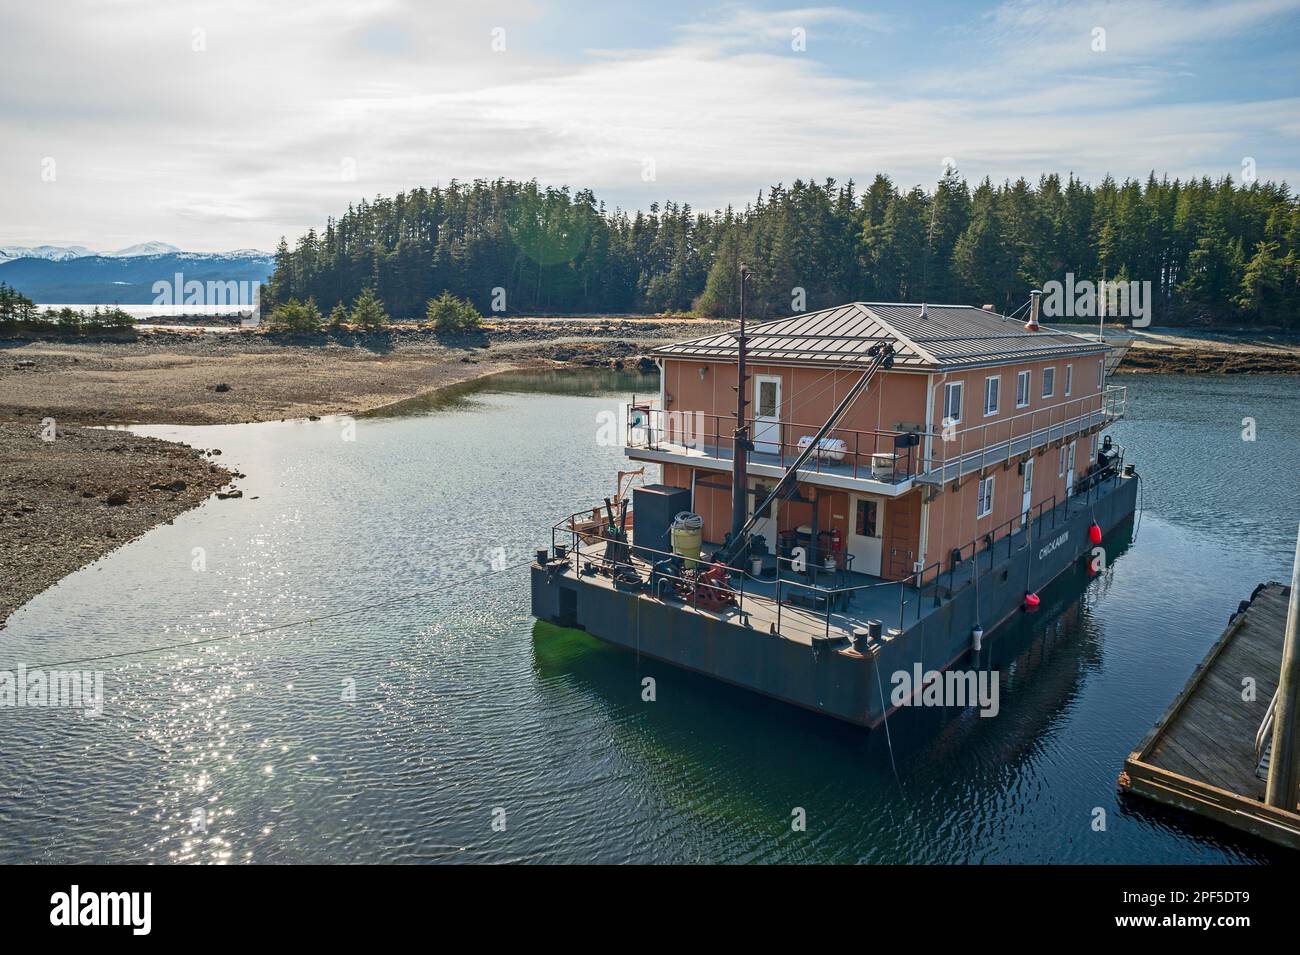 Chickaman barge crew quarters barge docked at False Island work camp on the Tongass National Forest, Alaska, USA. Stock Photo